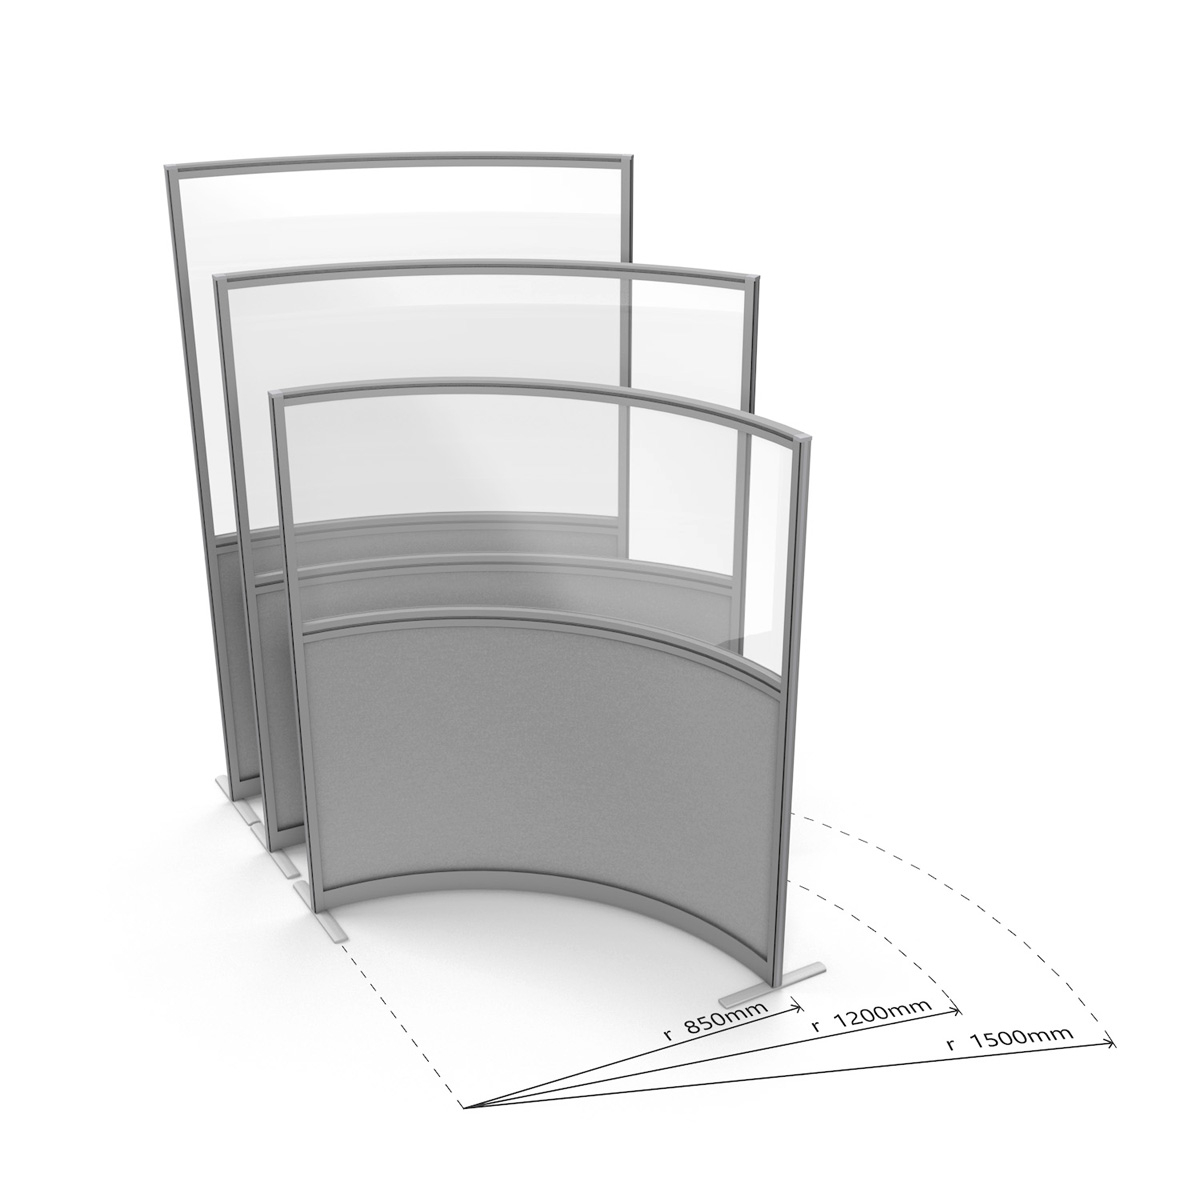 FRONTIER® Curved Glass Perspex Screens - Choose From Three Radius